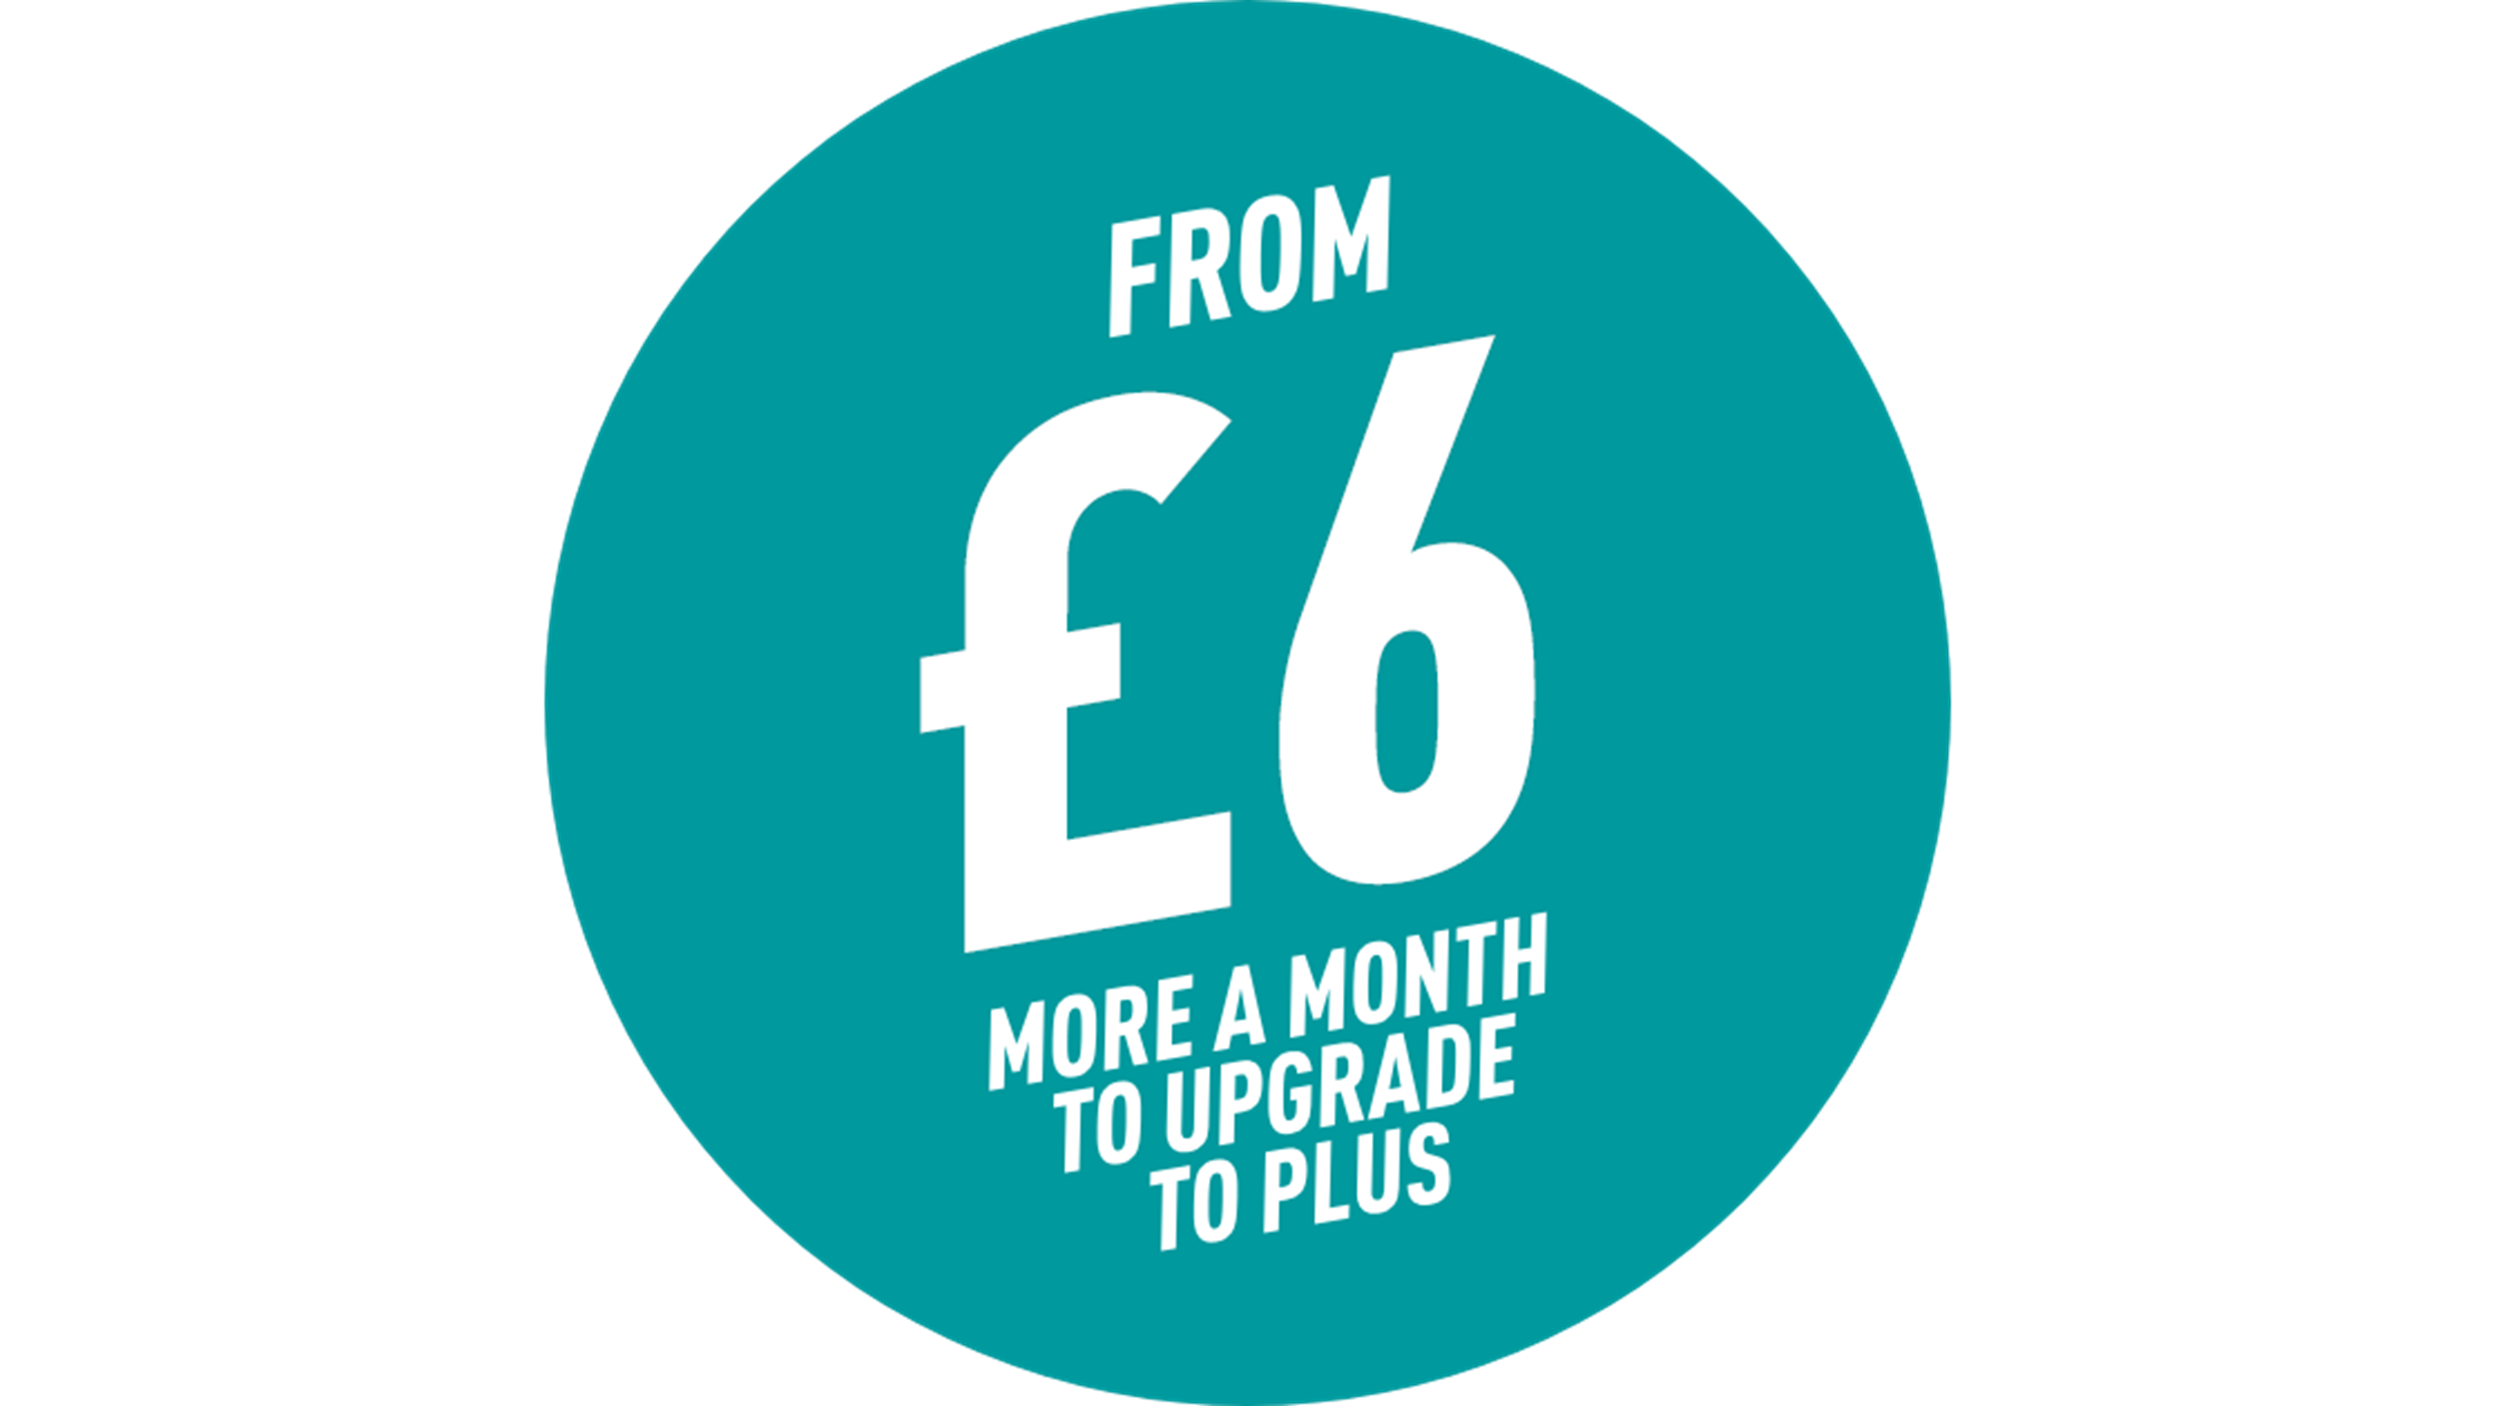 Upgrade from £6 a month